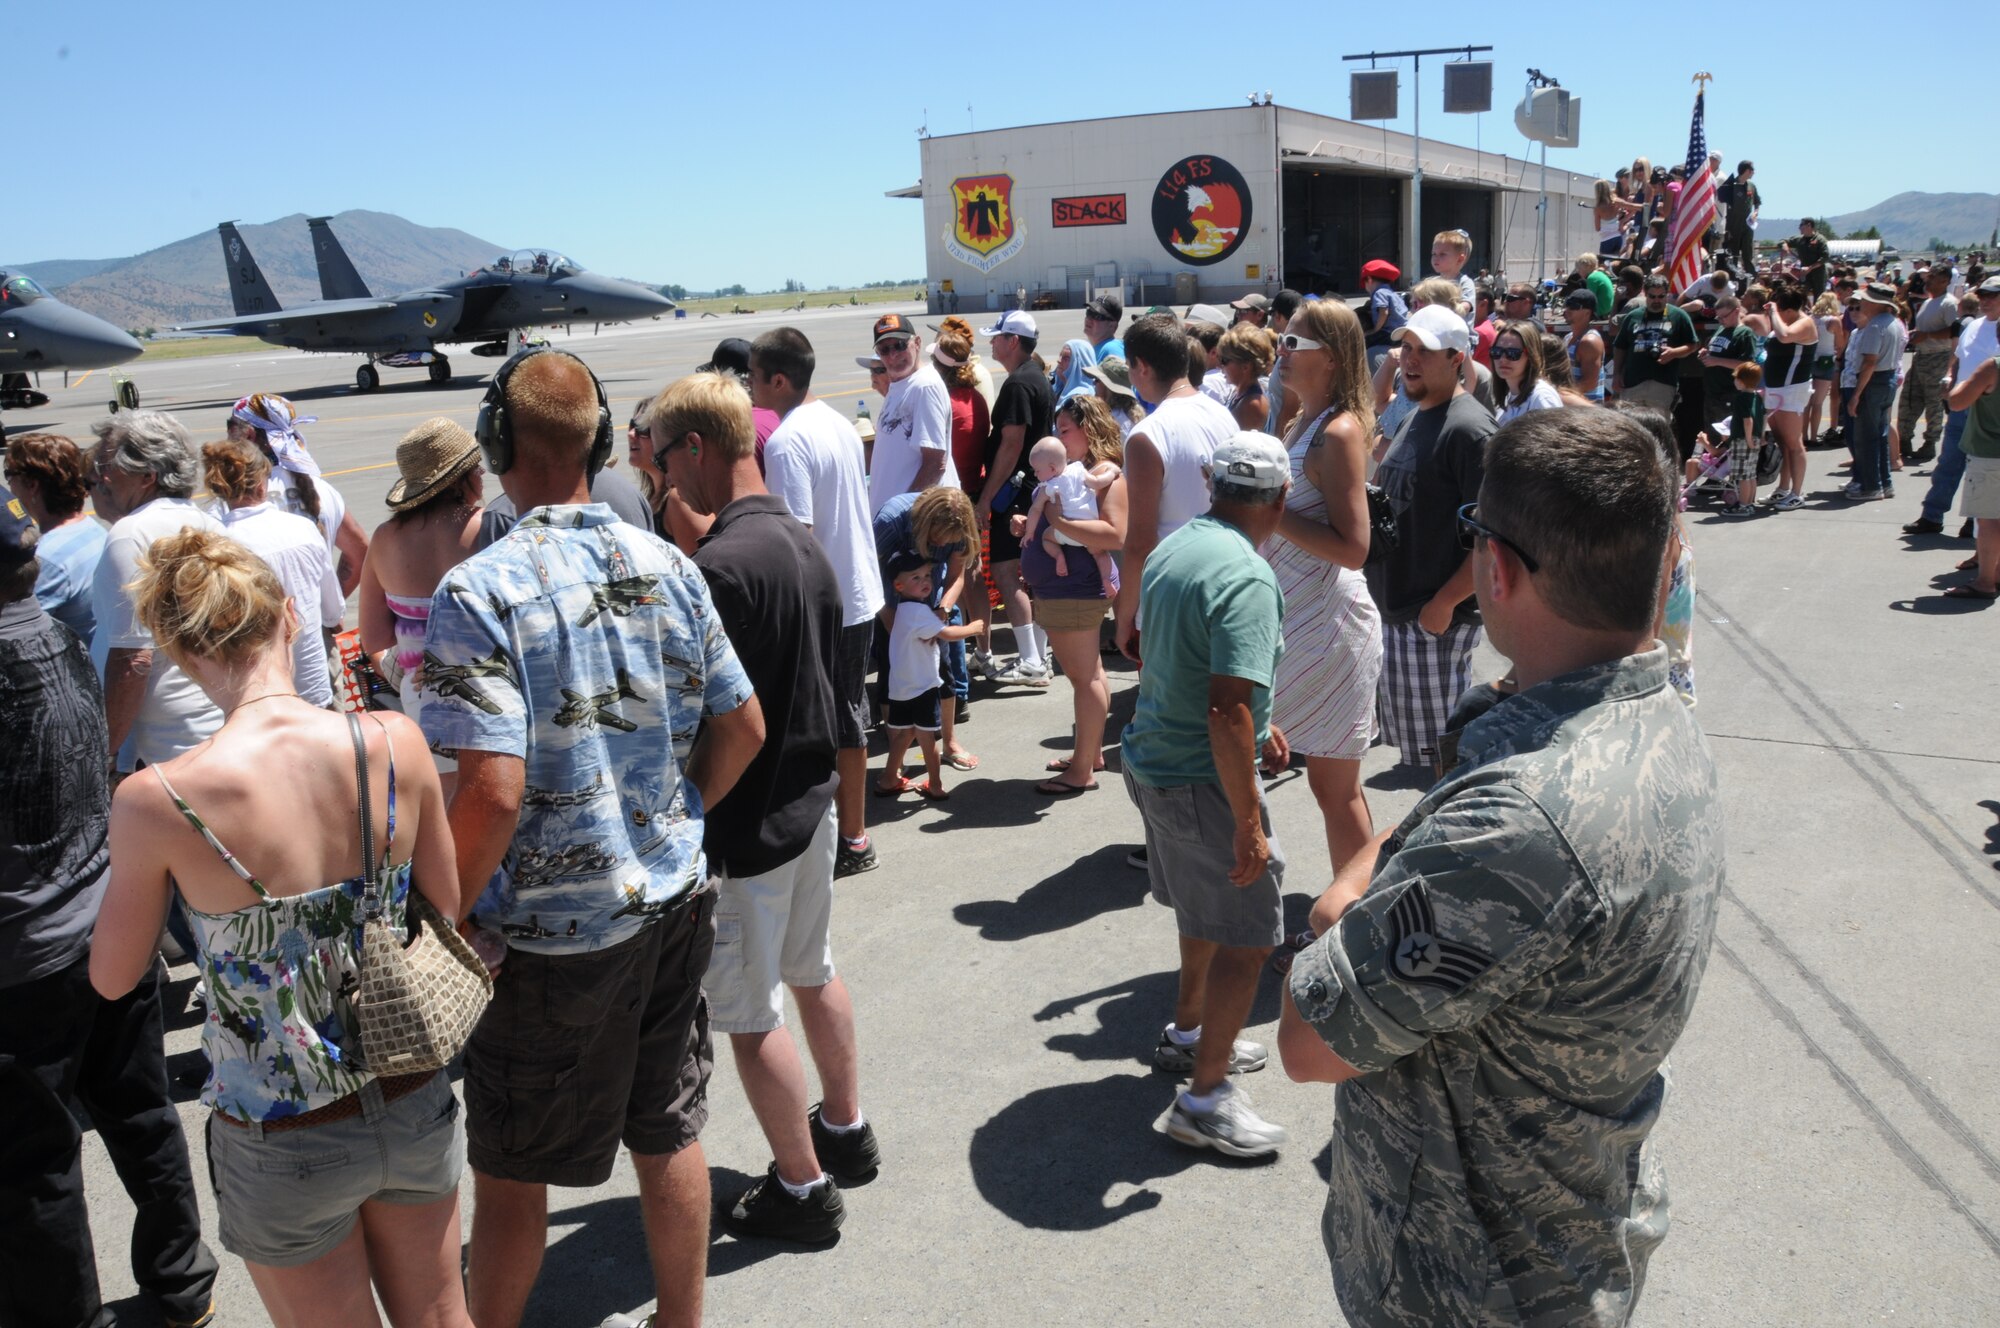 A crowd gathers at the flightline  edge to watch as ground crews prepare their aircraft for launch during the 14th biennial Sentry Eagle Open House at Kingsley Field, Klamath Falls, Ore. July 23, 2011.  (U.S. Air Force photo by Tech. Sgt. Jennifer Shirar)